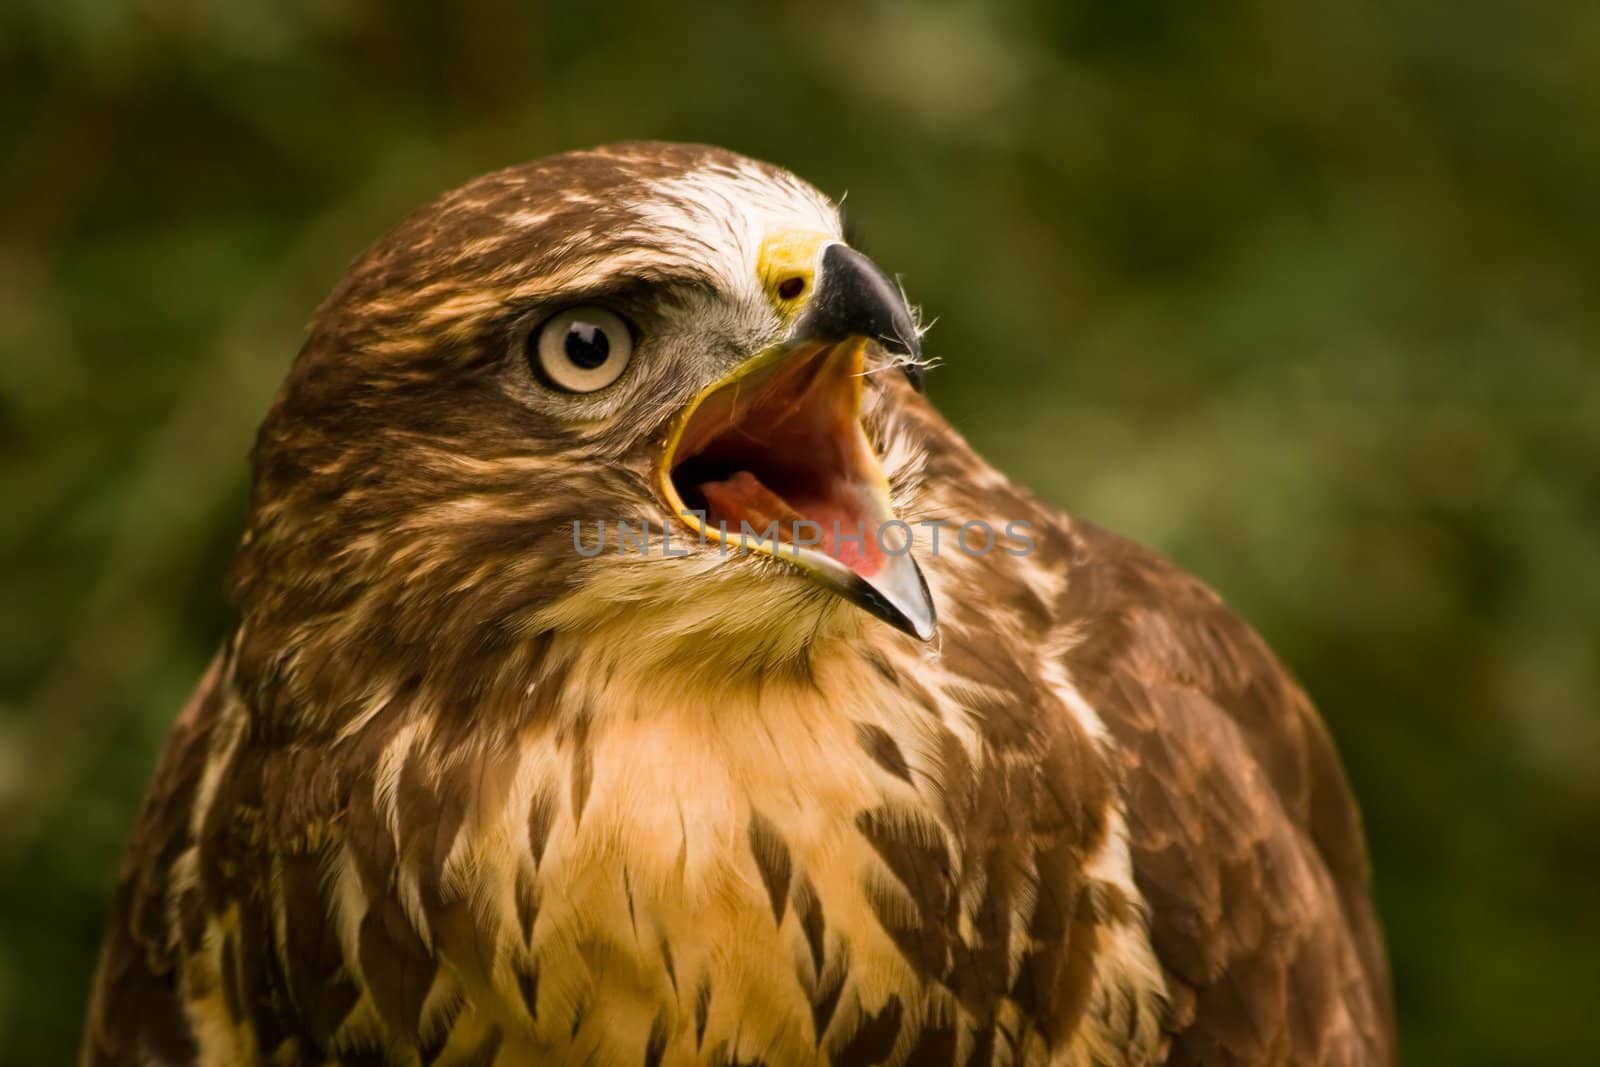 Buzzard screaming by Colette